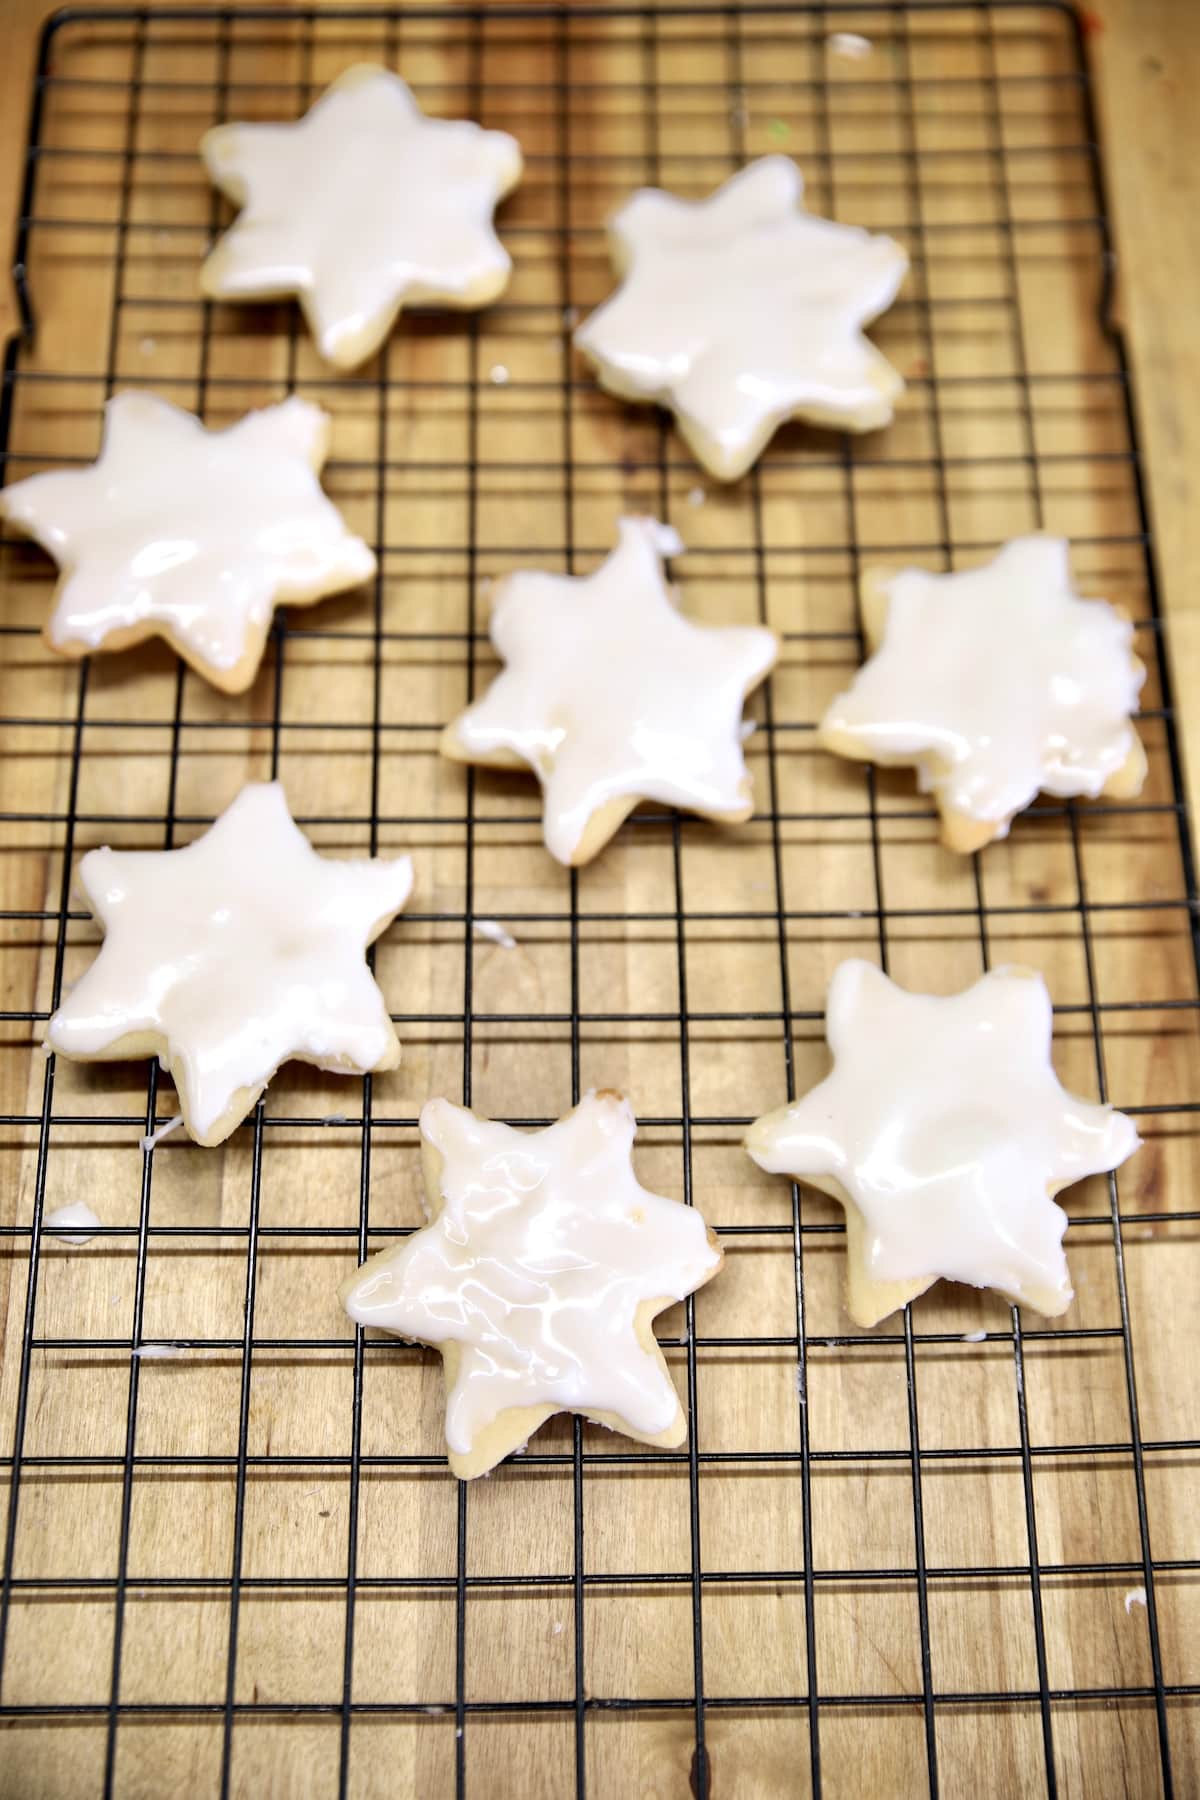 Star cookies with icing on a wire rack.